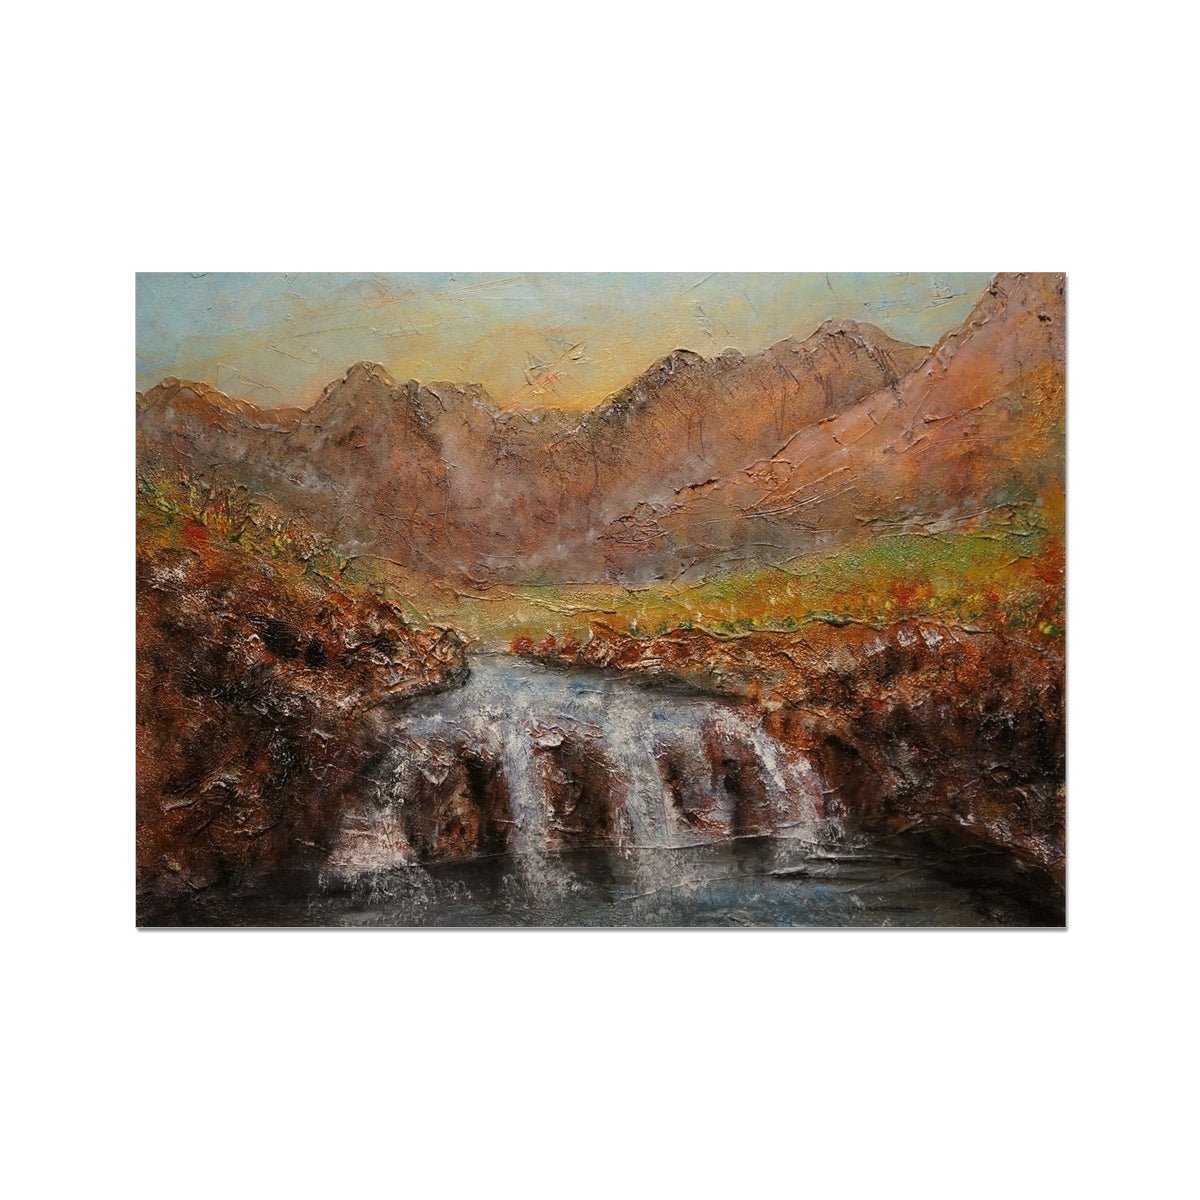 Fairy Pools Dawn Skye Painting | Fine Art Prints From Scotland-Unframed Prints-Skye Art Gallery-A2 Landscape-Paintings, Prints, Homeware, Art Gifts From Scotland By Scottish Artist Kevin Hunter